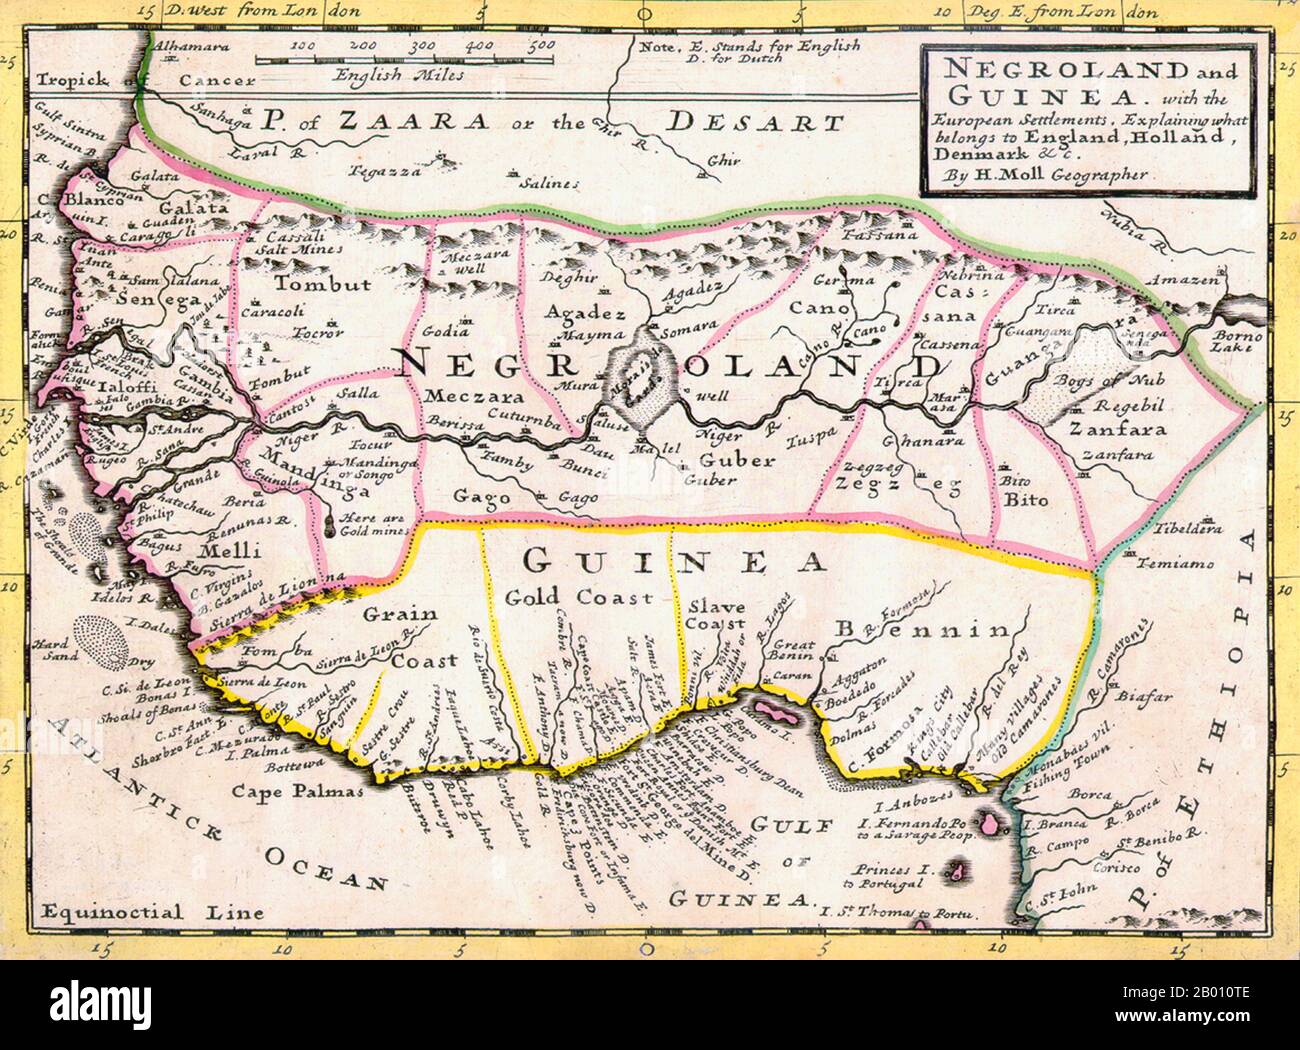 Nigeria: Map of Negroland and Guinea by Herman Moll (1654-1732), showing the Kingdom of Benin ('Bennin') by the Gulf of Guinea, 1727.  'Negroland and Guinea with the European Settlements, Explaining what belongs to England, Holland, Denmark, etc'. By Herman Moll (1654-1732), Geographer. Stock Photo